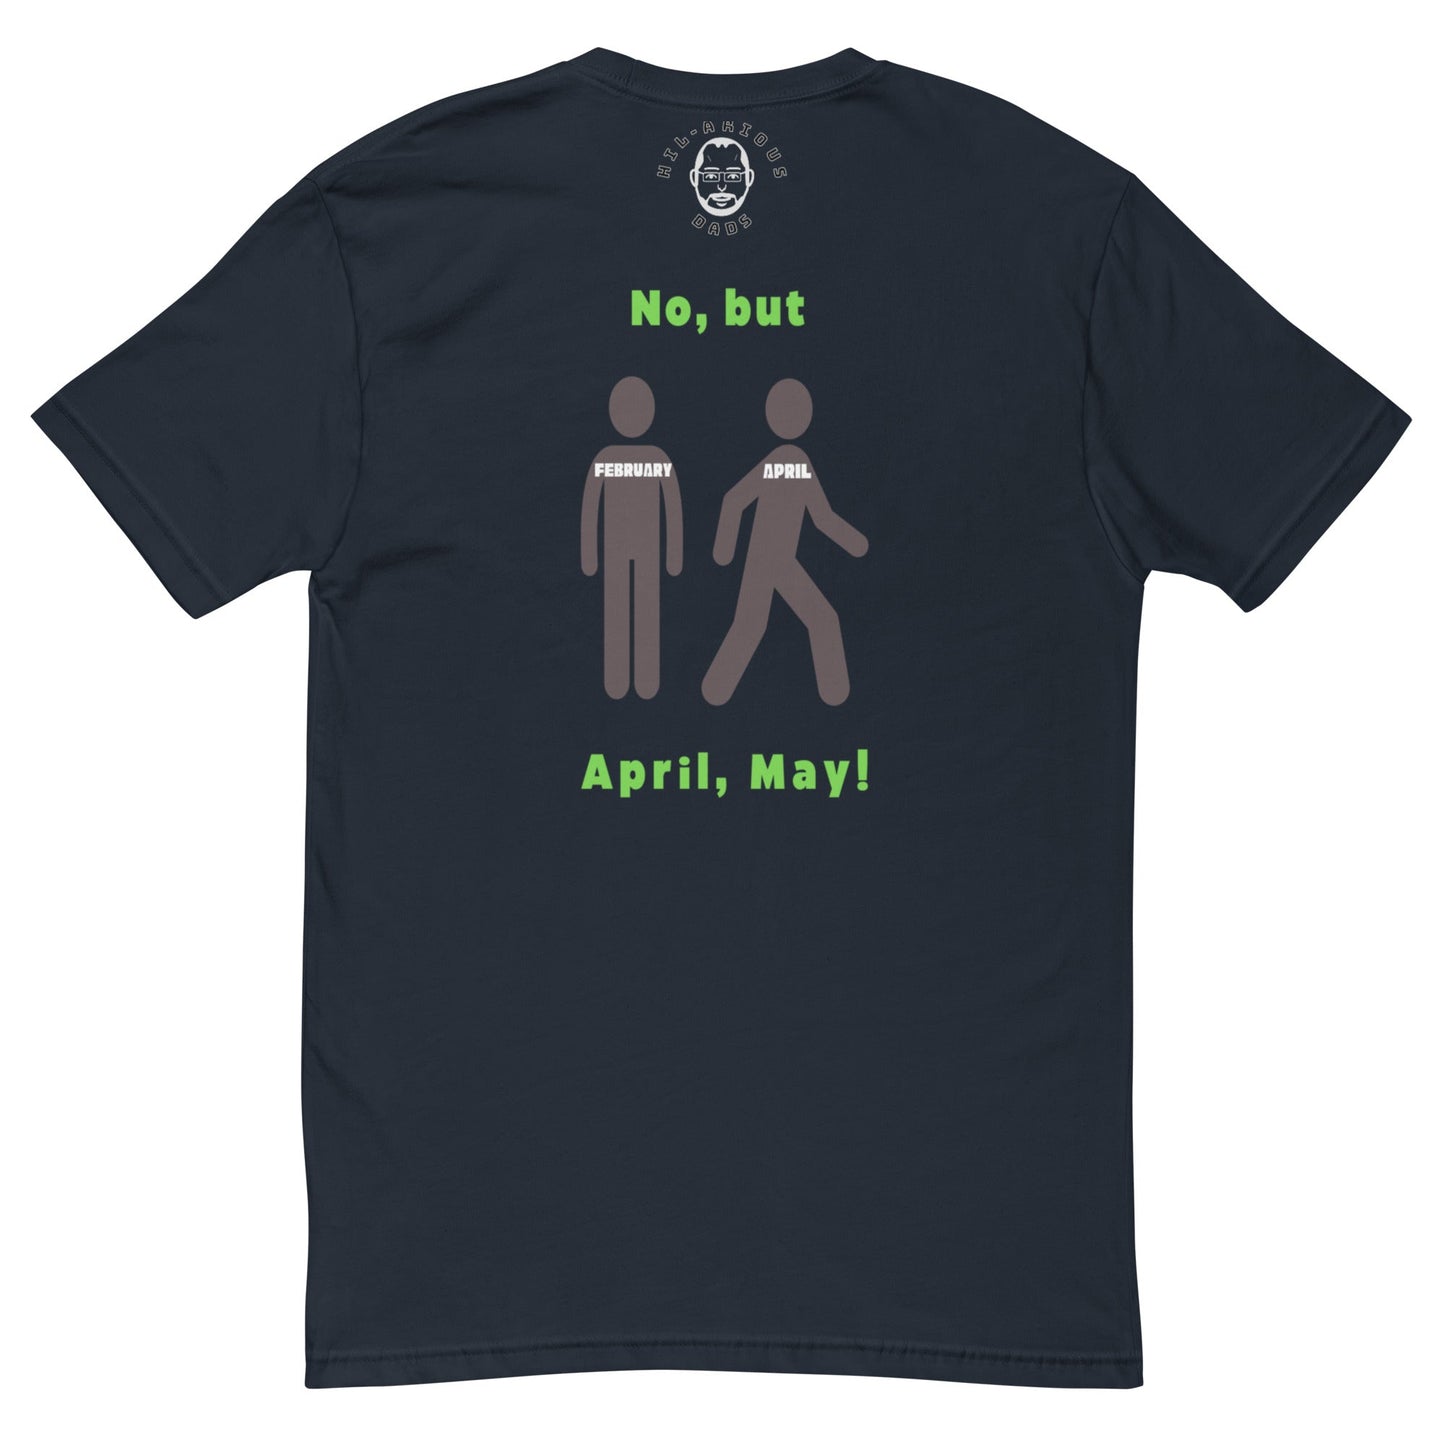 Can February March?-T-shirt - Hil-arious Dads